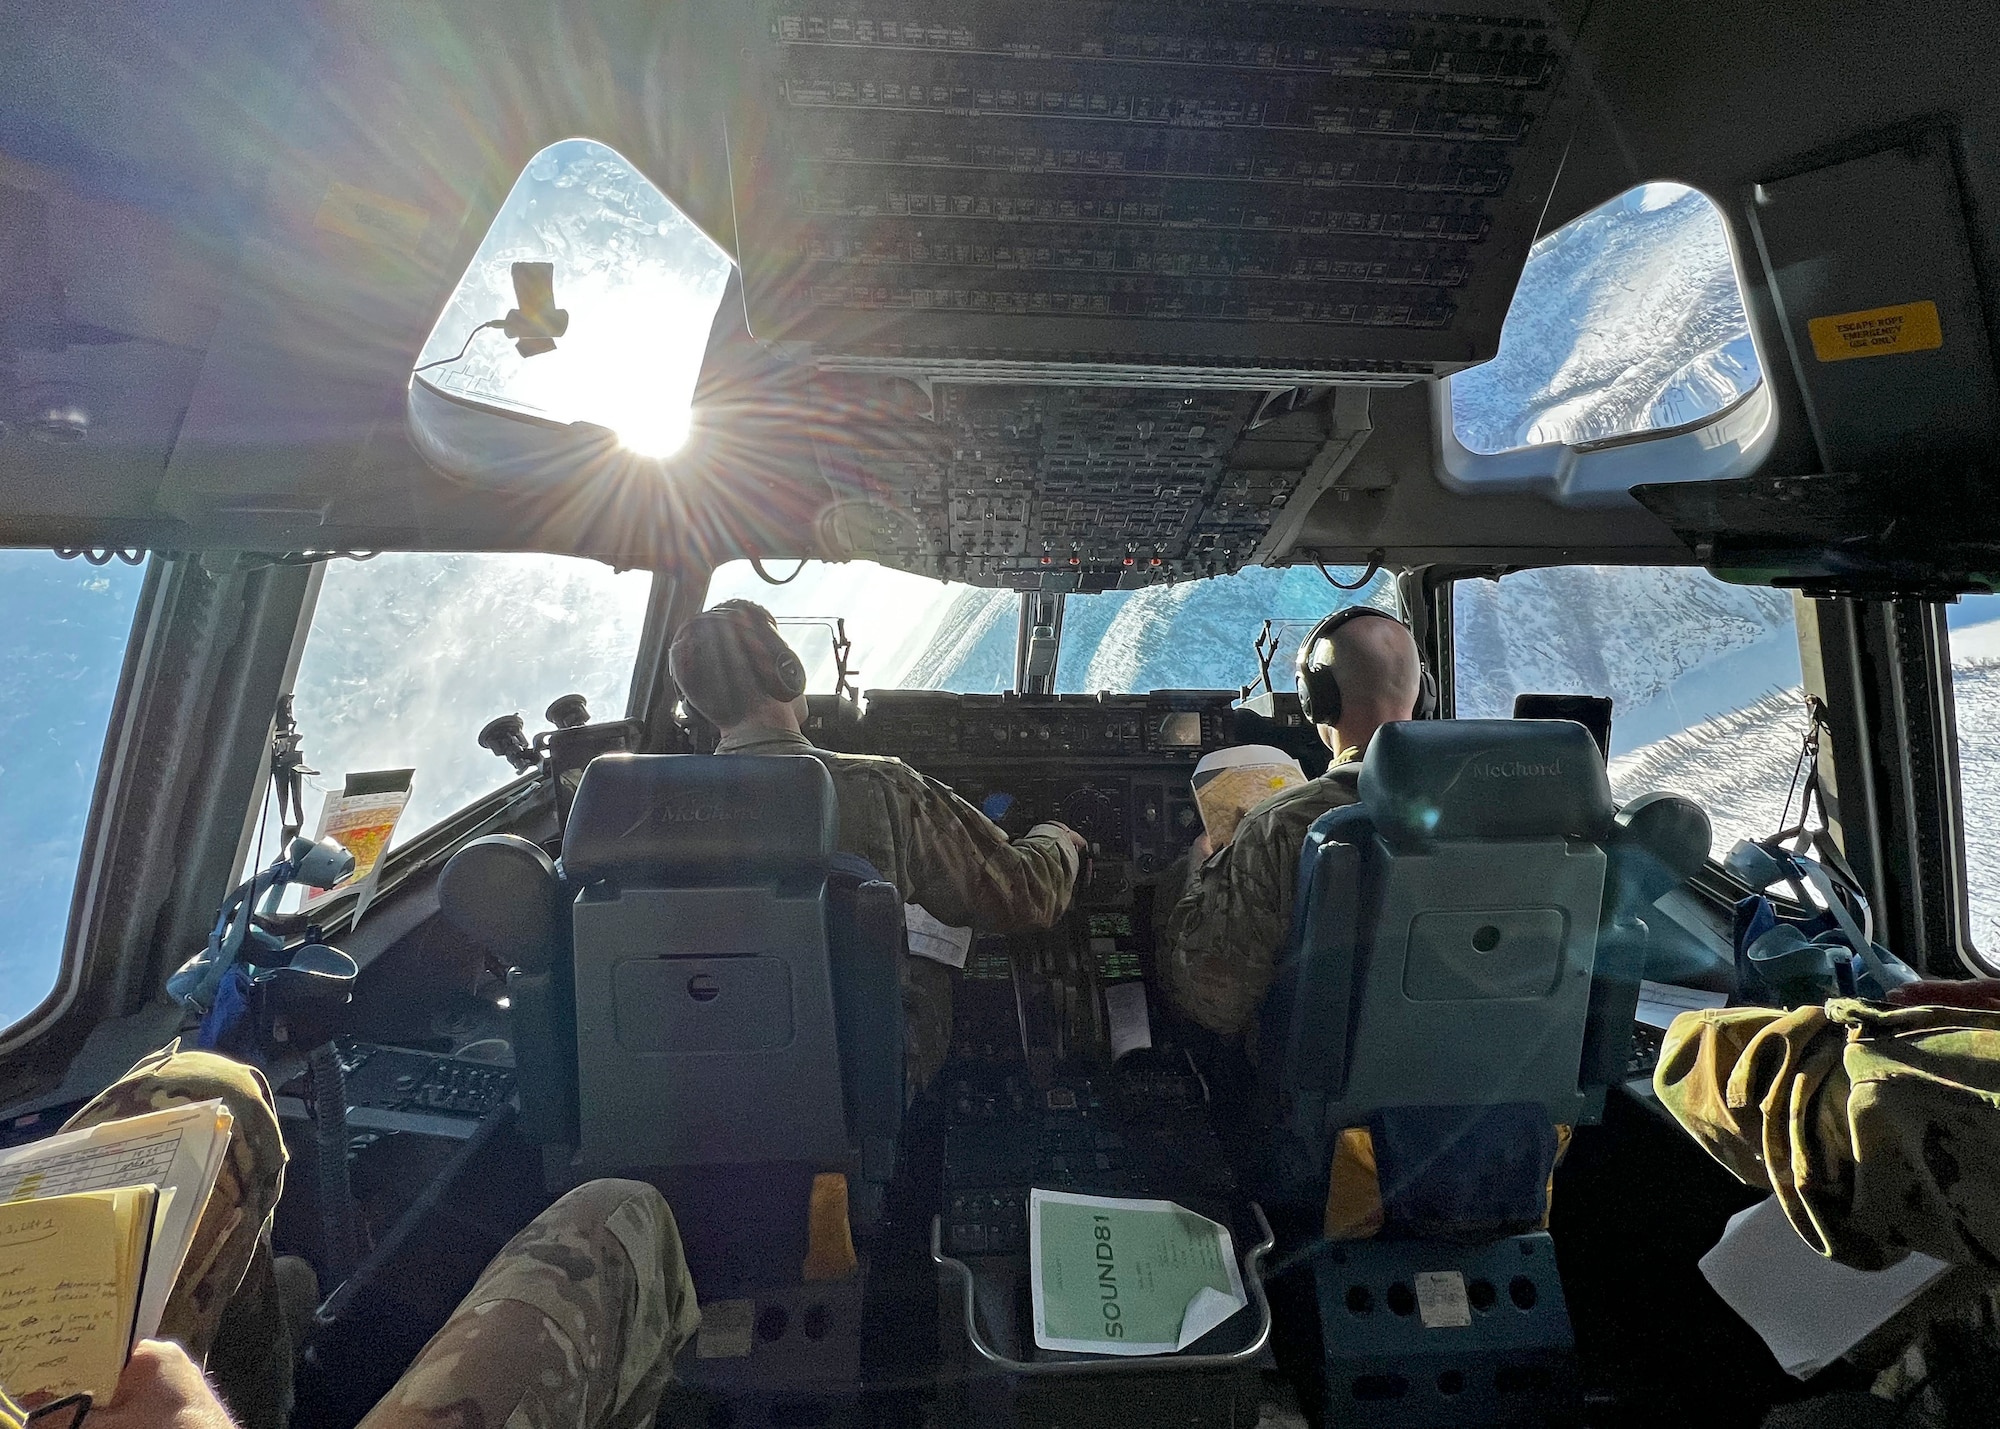 U.S. Air Force Capt. Ben Basham, left, and Capt. Dan Wold, both pilots with the 8th Airlift Squadron, fly a low-level simulated airdrop in a C-17 Globemaster III for Exercise Rainier War 22A at Joint Base Elmendorf-Richardson, Alaska, March 23, 2022. Rainier War is a semi-annual, large readiness exercise led by the 62nd Airlift Wing. It is designed to train aircrews under realistic scenarios that support a full spectrum readiness operations against modern threats and replicate today’s contingency operations. (U.S. Air Force photo by Airman 1st Class Callie Norton)